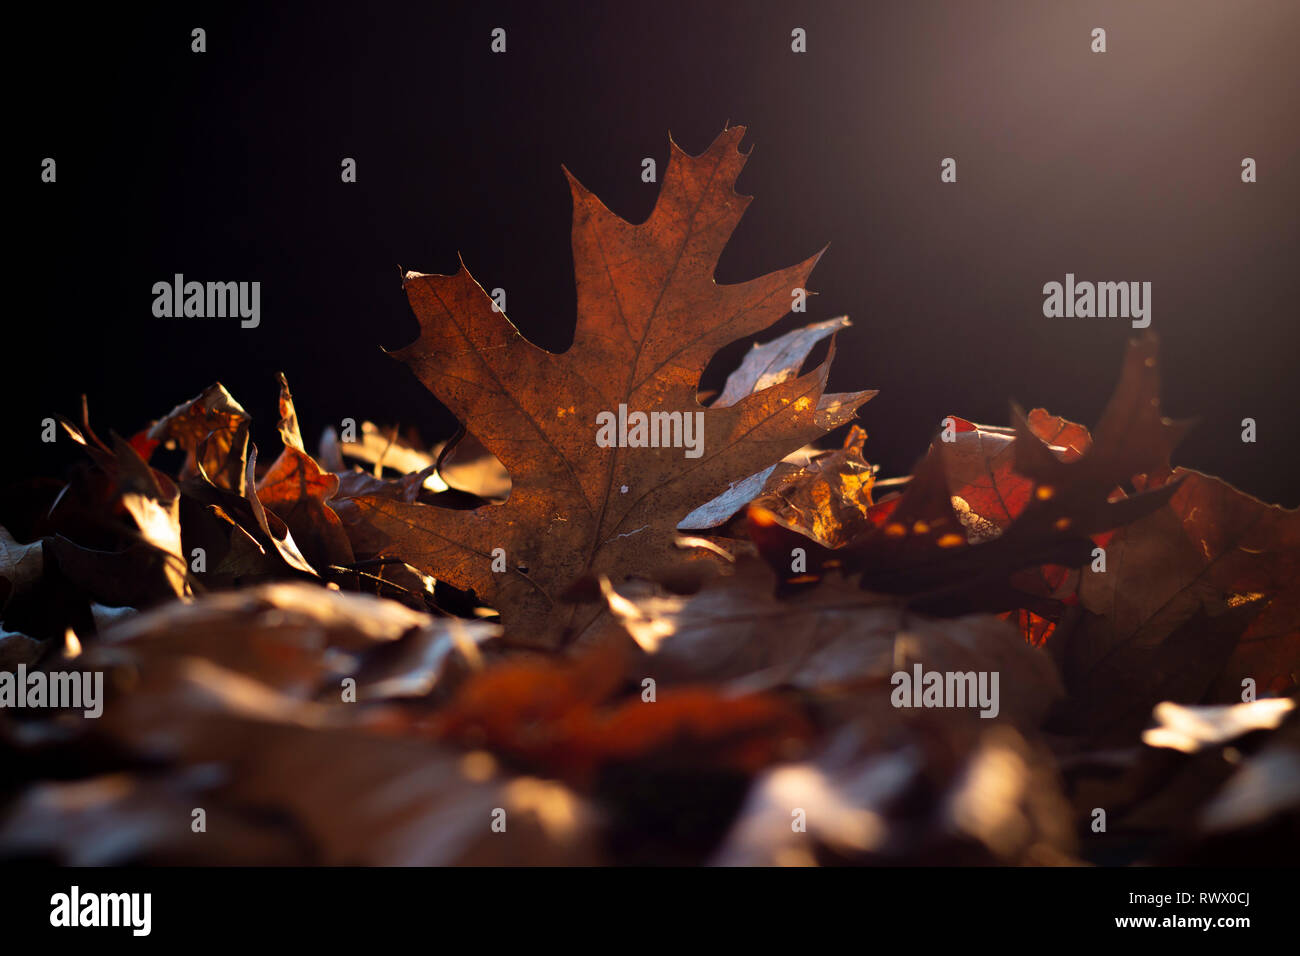 Maple leaves drizzled in sunlight Stock Photo